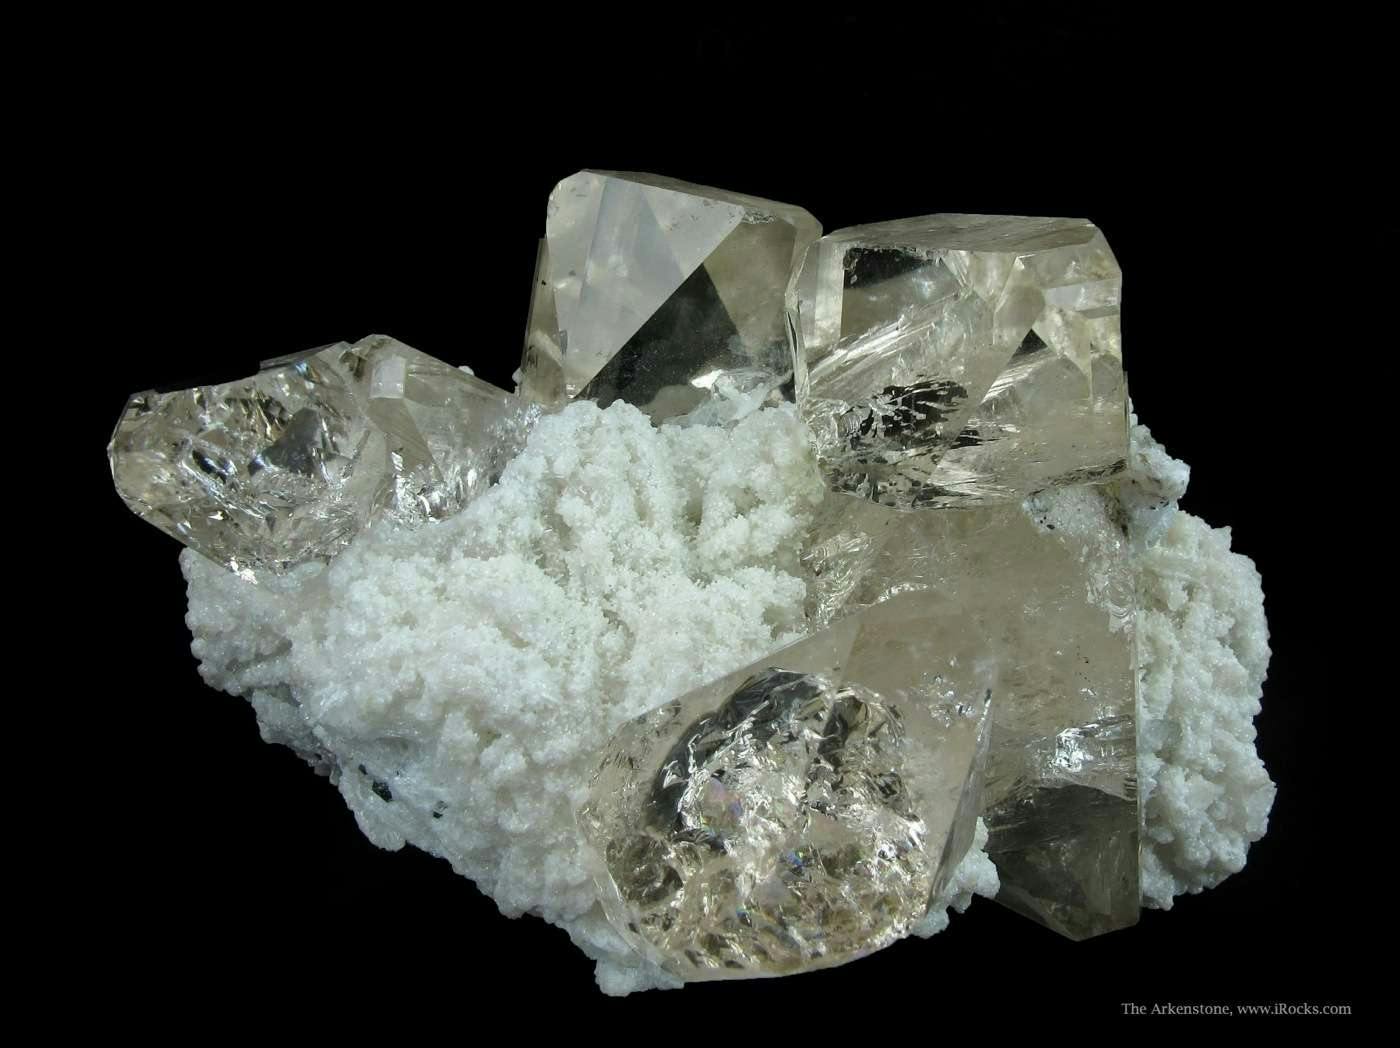 What’s the Difference Between Mineral Samples and Gem Rough?